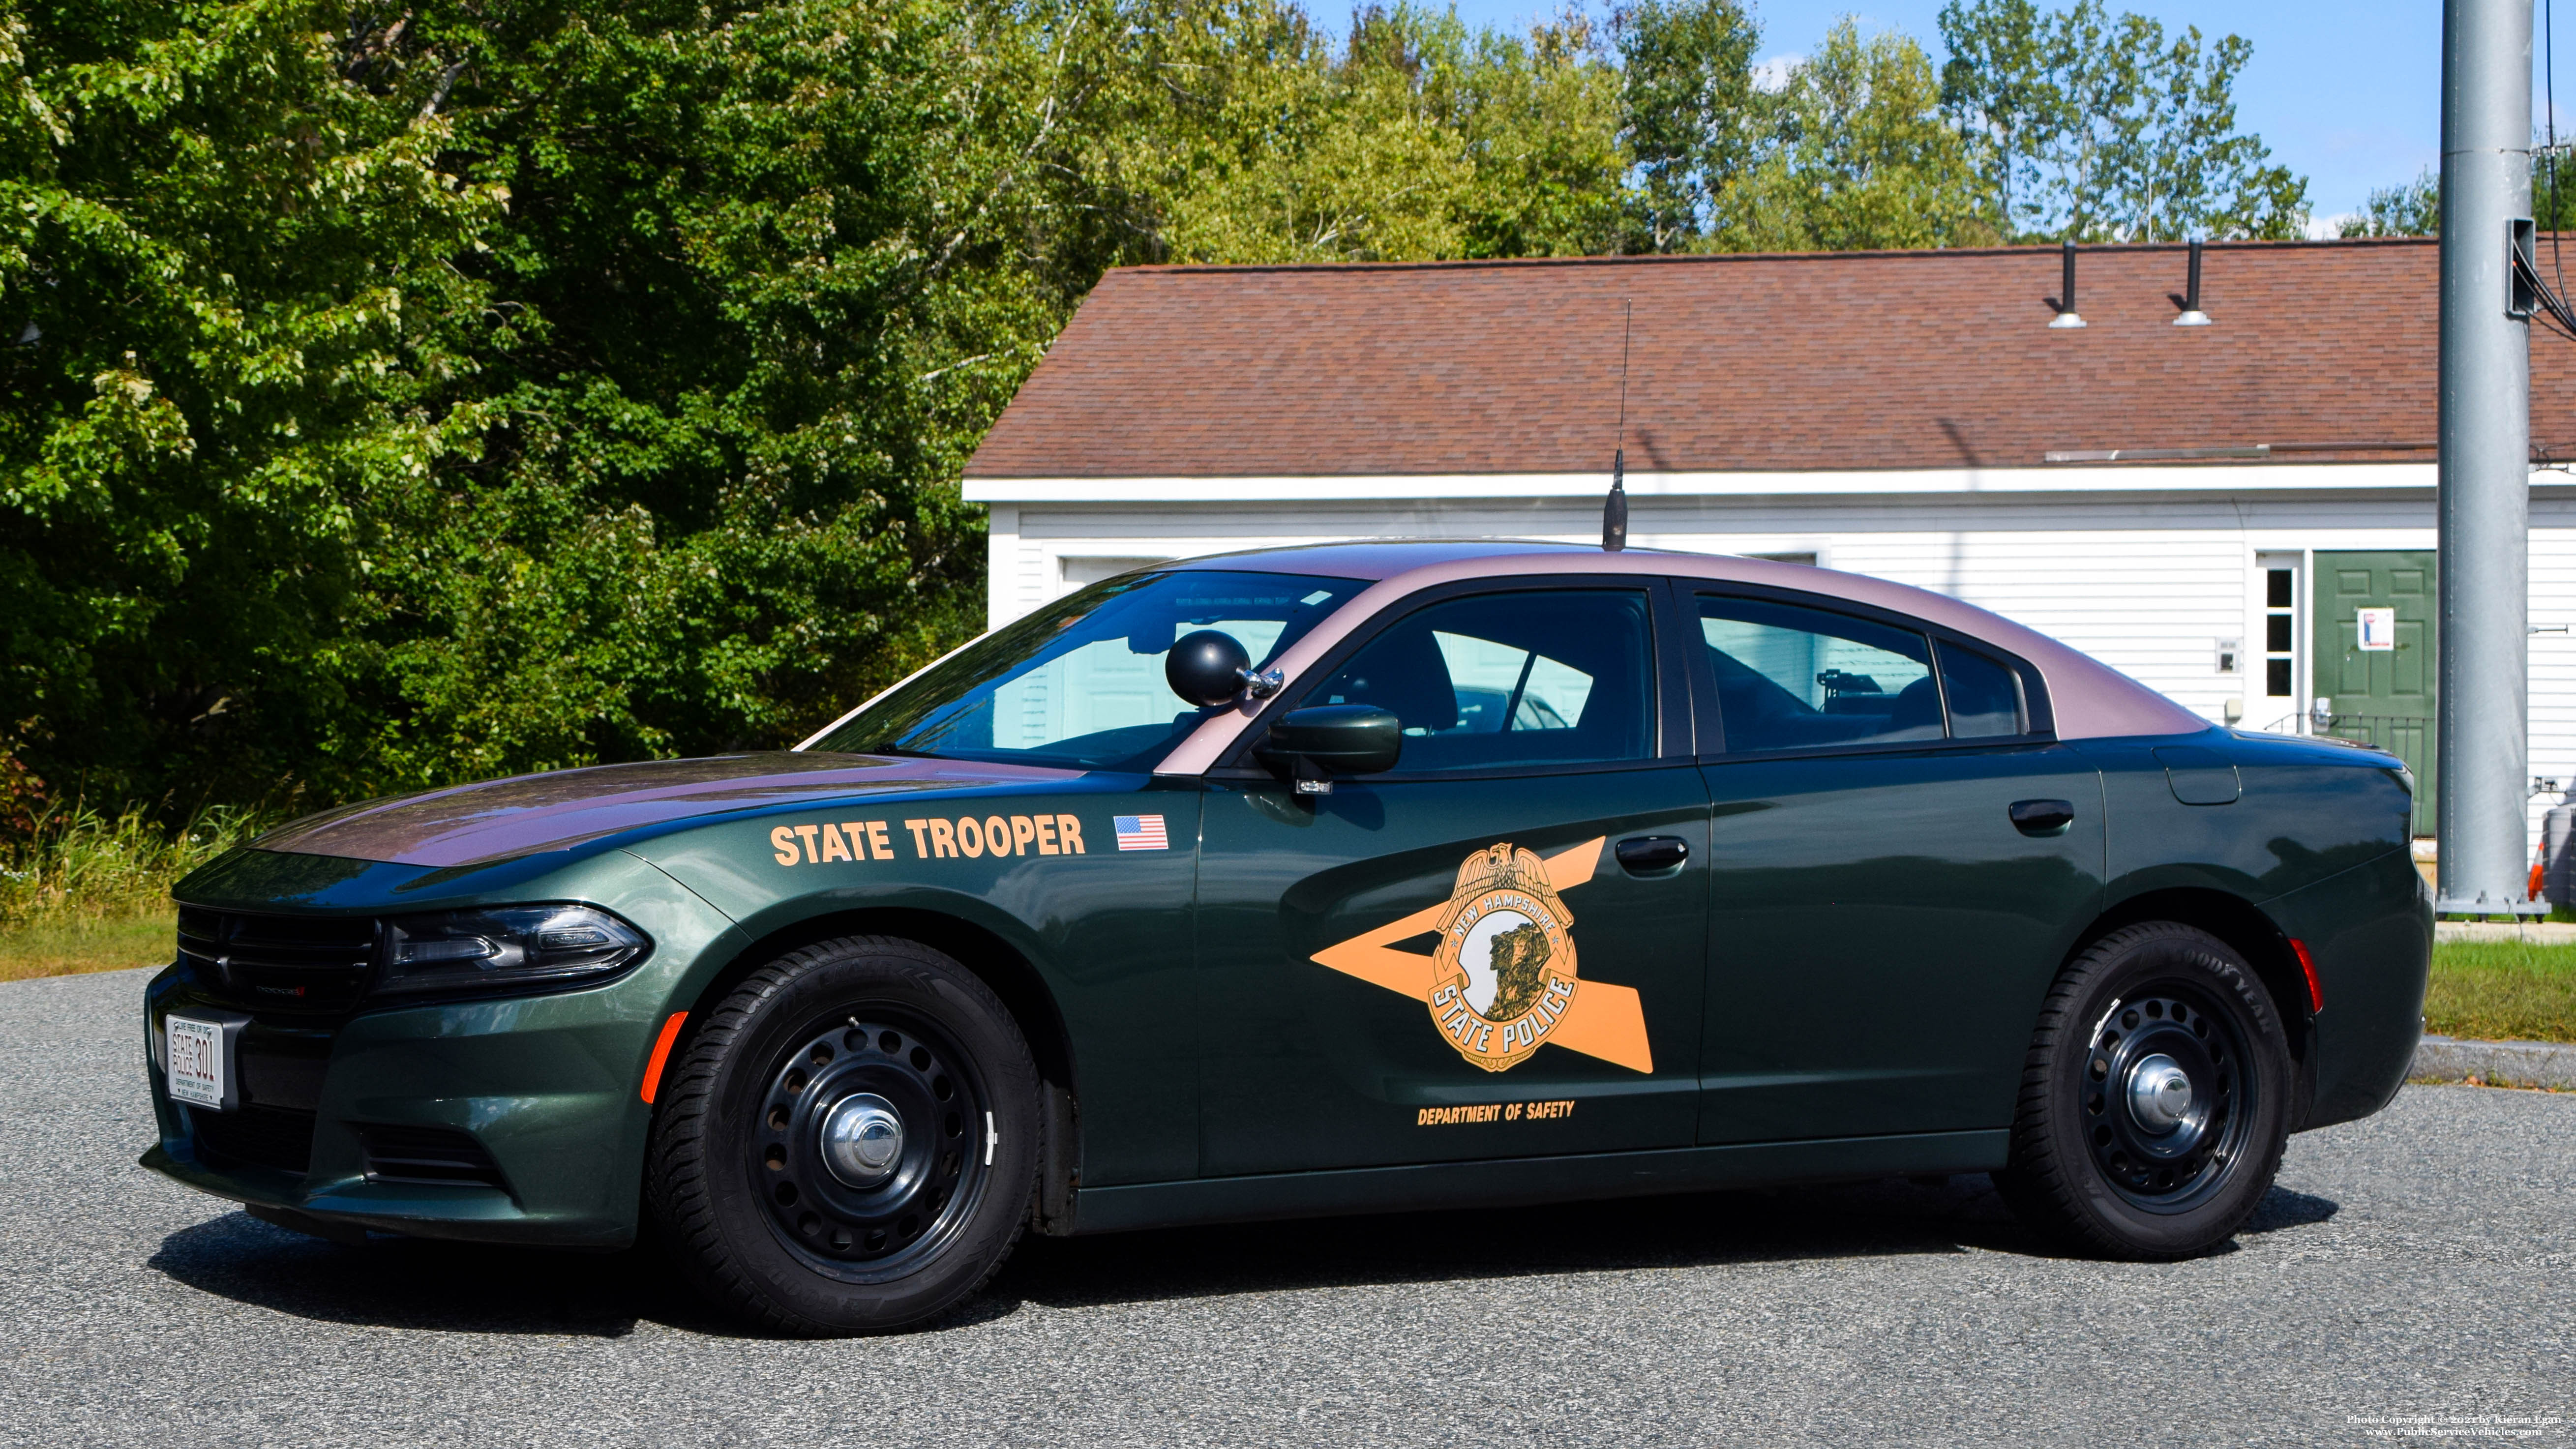 A photo  of New Hampshire State Police
            Cruiser 301, a 2017 Dodge Charger             taken by Kieran Egan